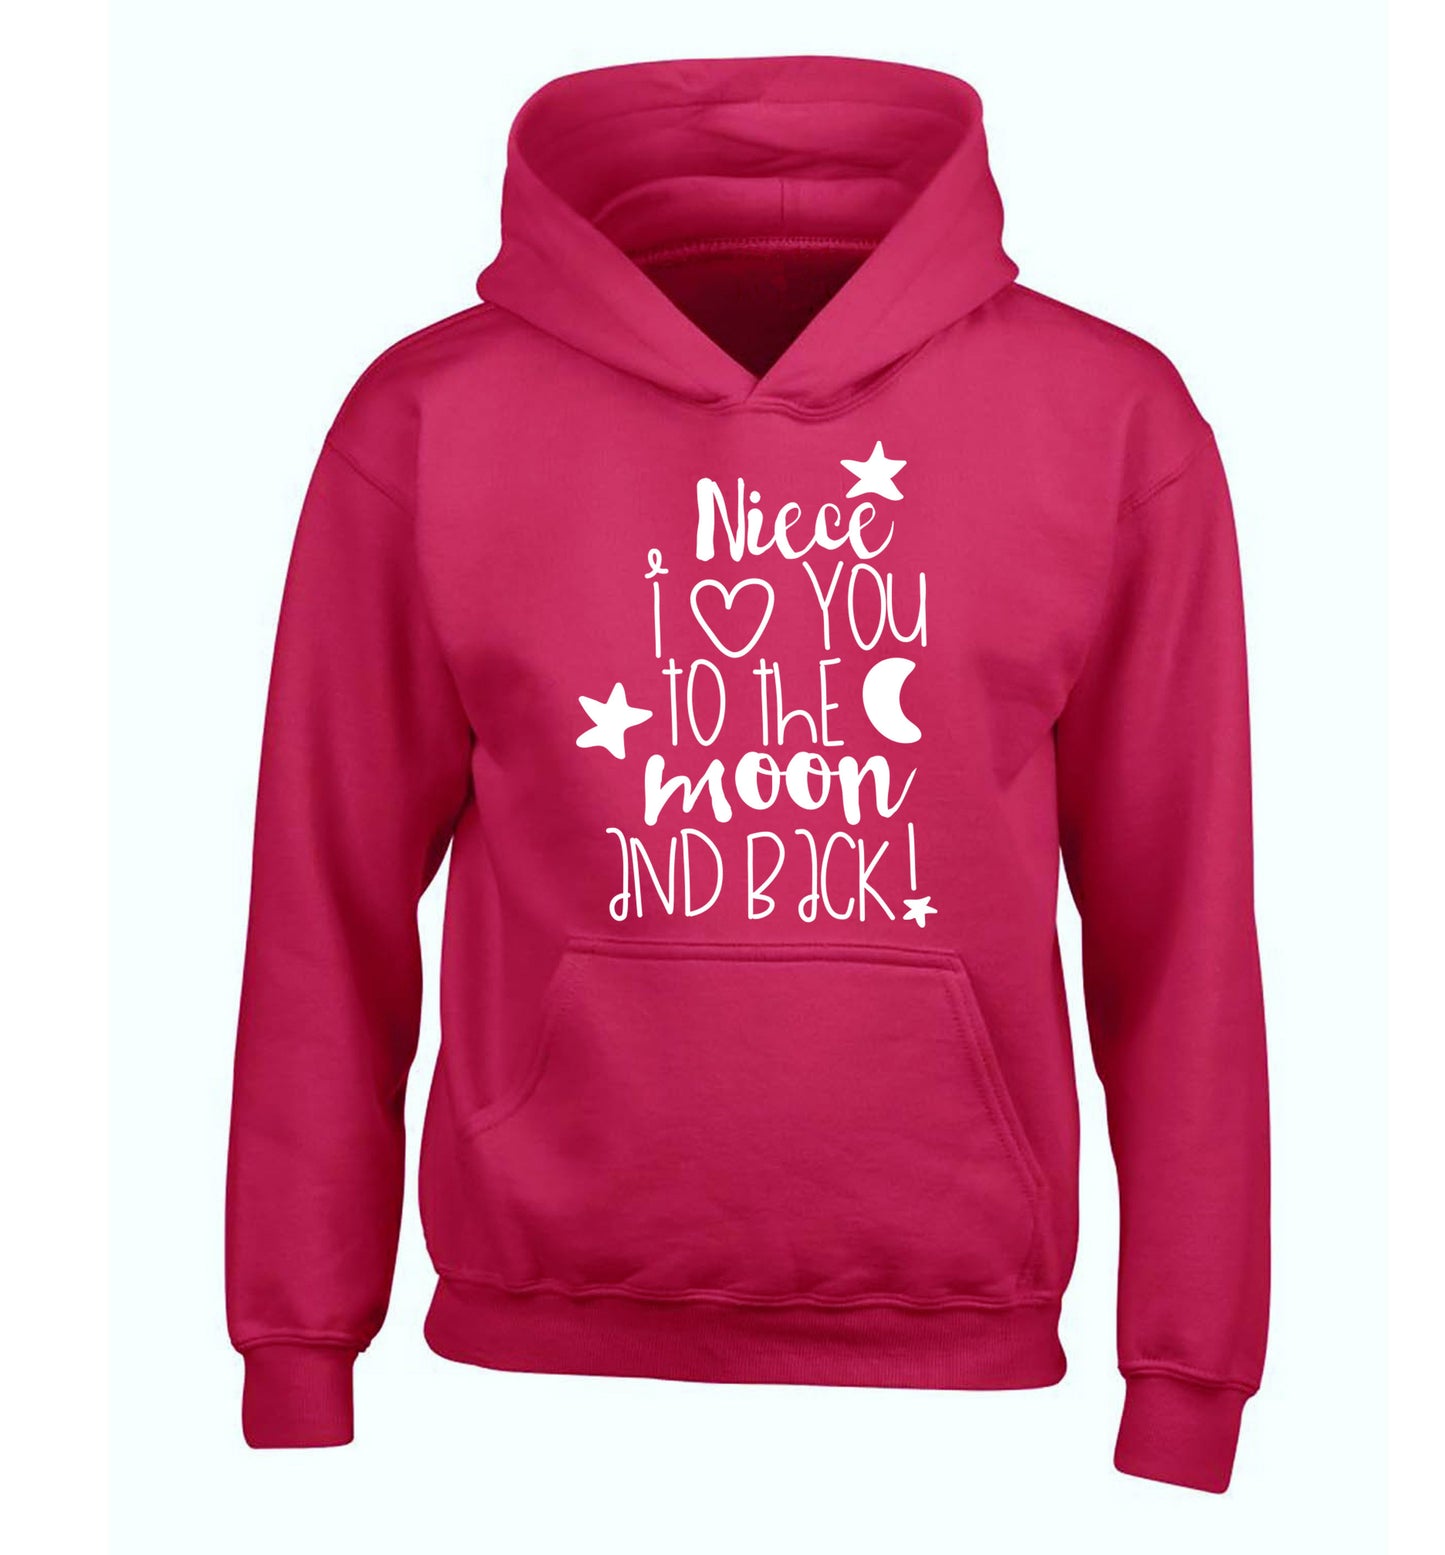 Niece I love you to the moon and back children's pink hoodie 12-14 Years